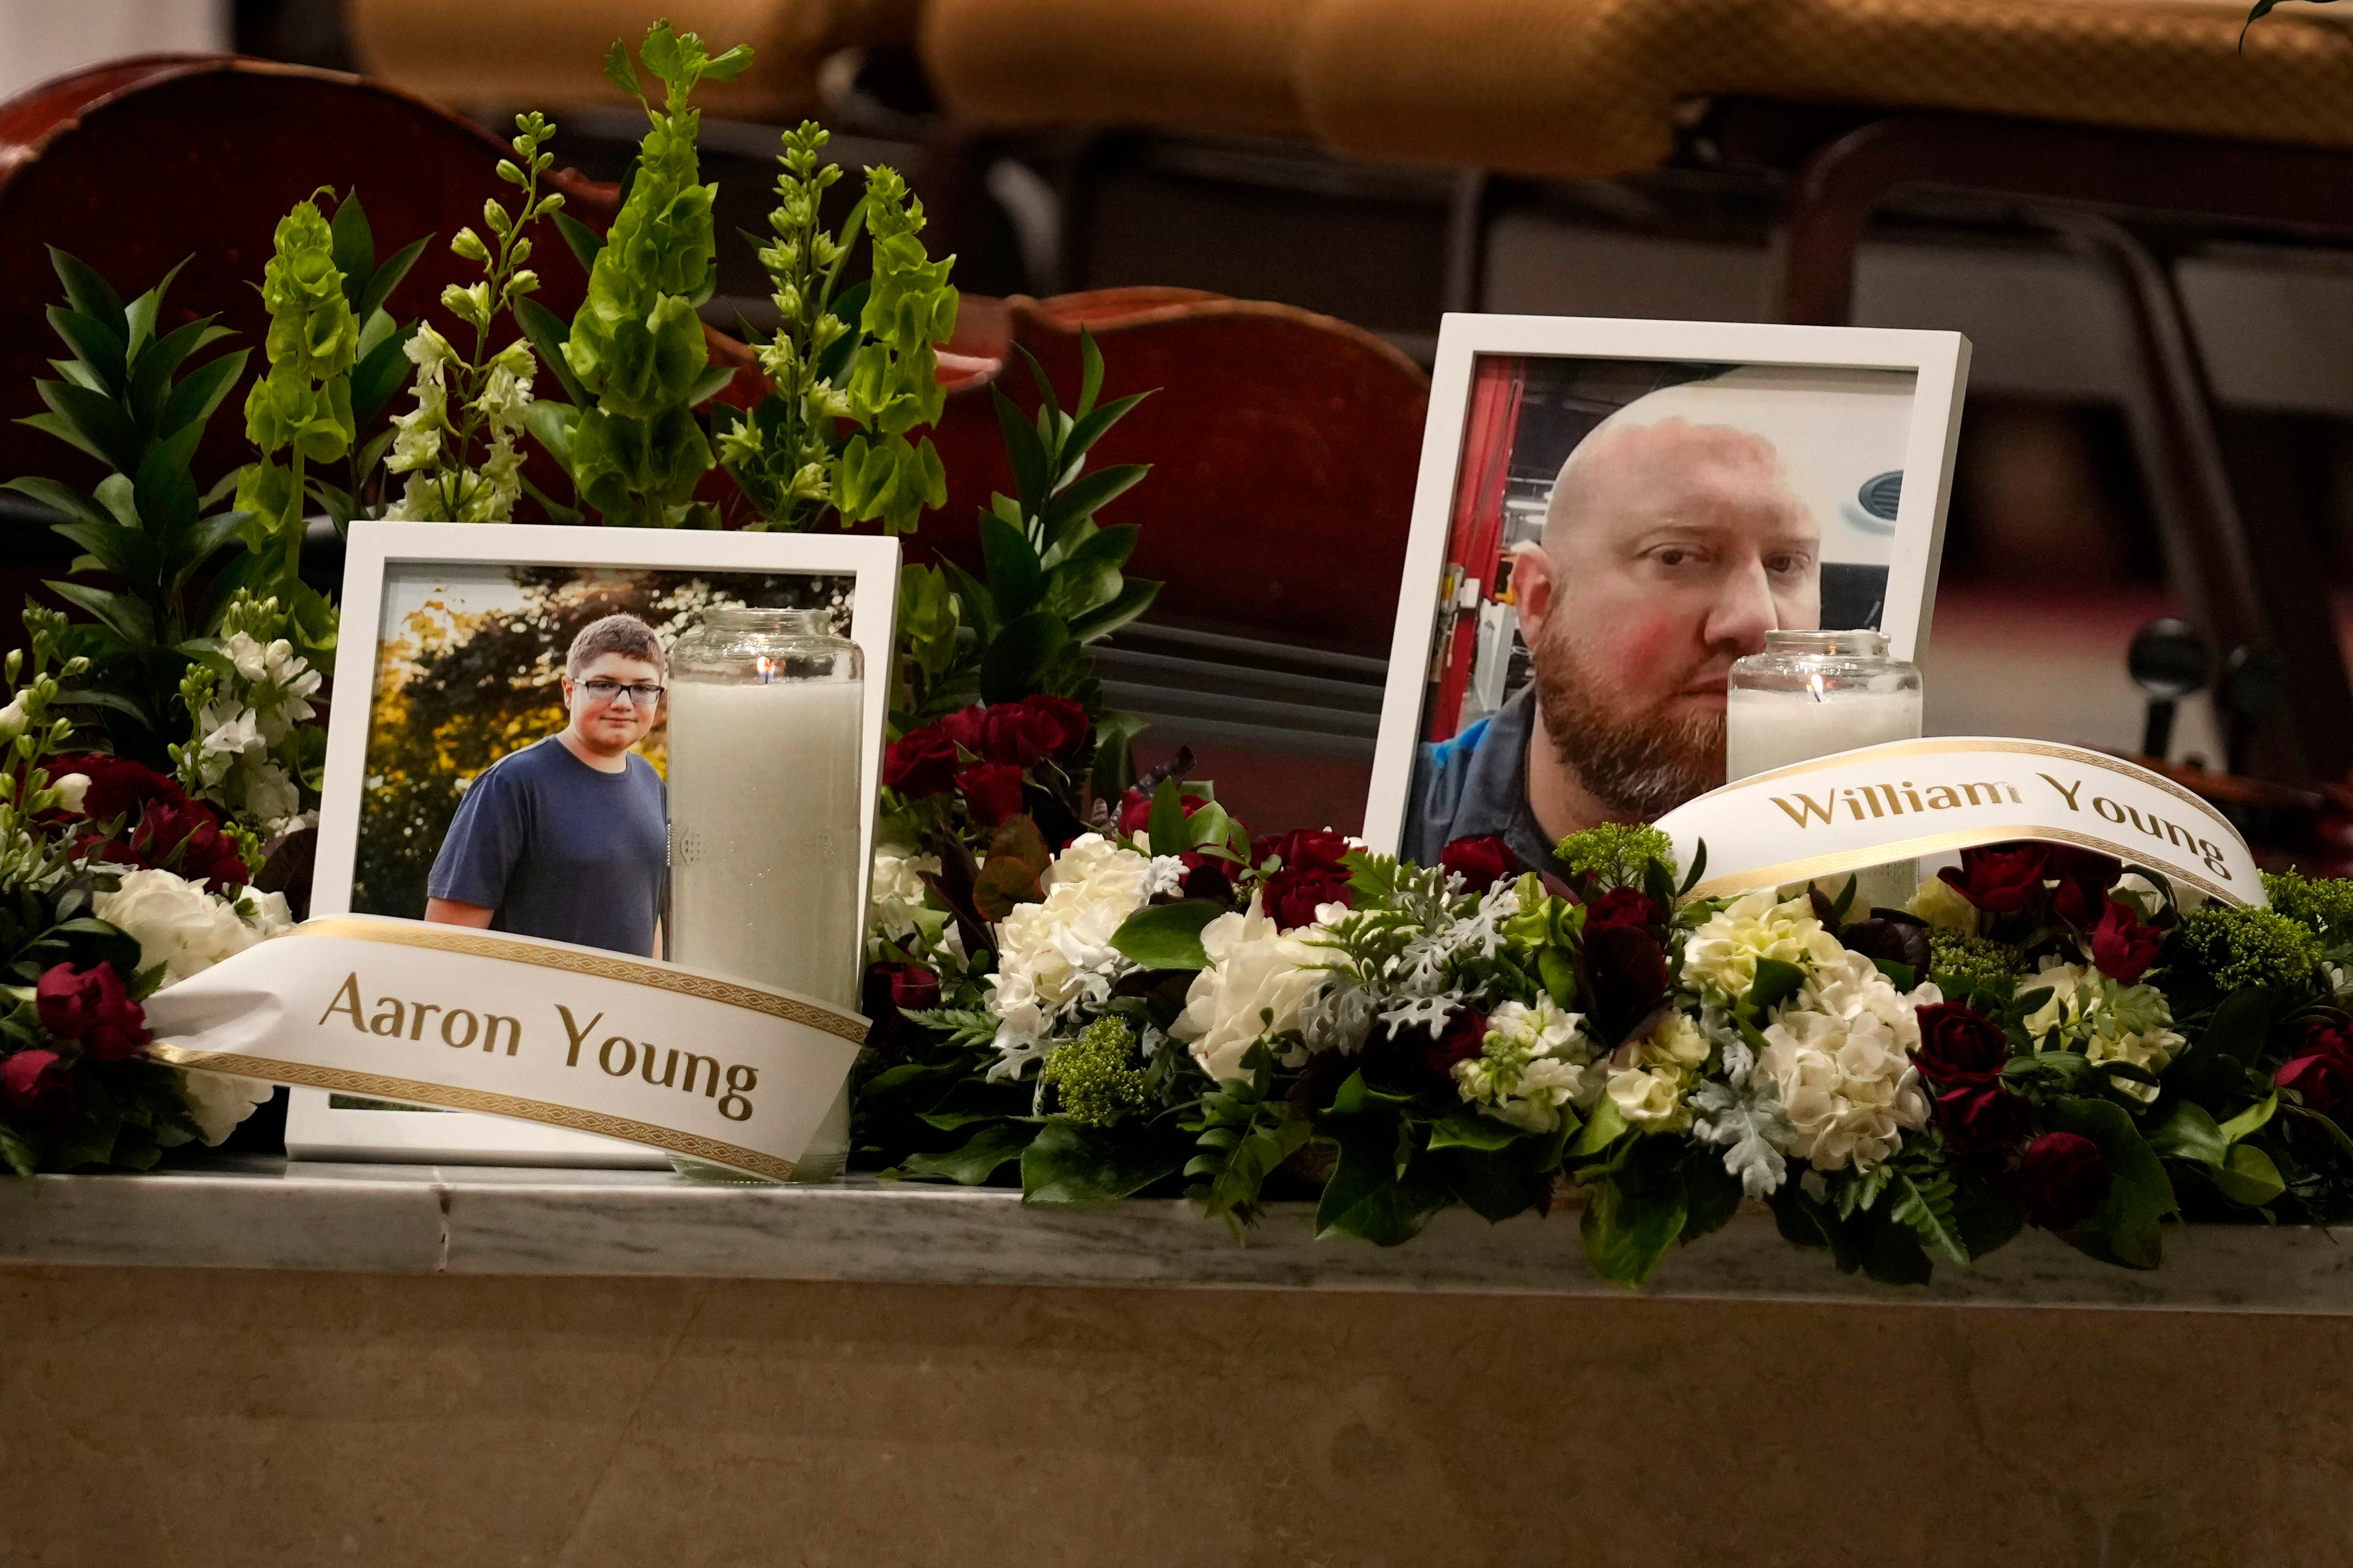 Photos of Aaron Young and his father, William Young, are displayed at a vigil for the victims of Wednesday's mass shootings at the Basilica of Saints Peter and Paul, Sunday, Oct. 29, 2023, in Lewiston, Maine.